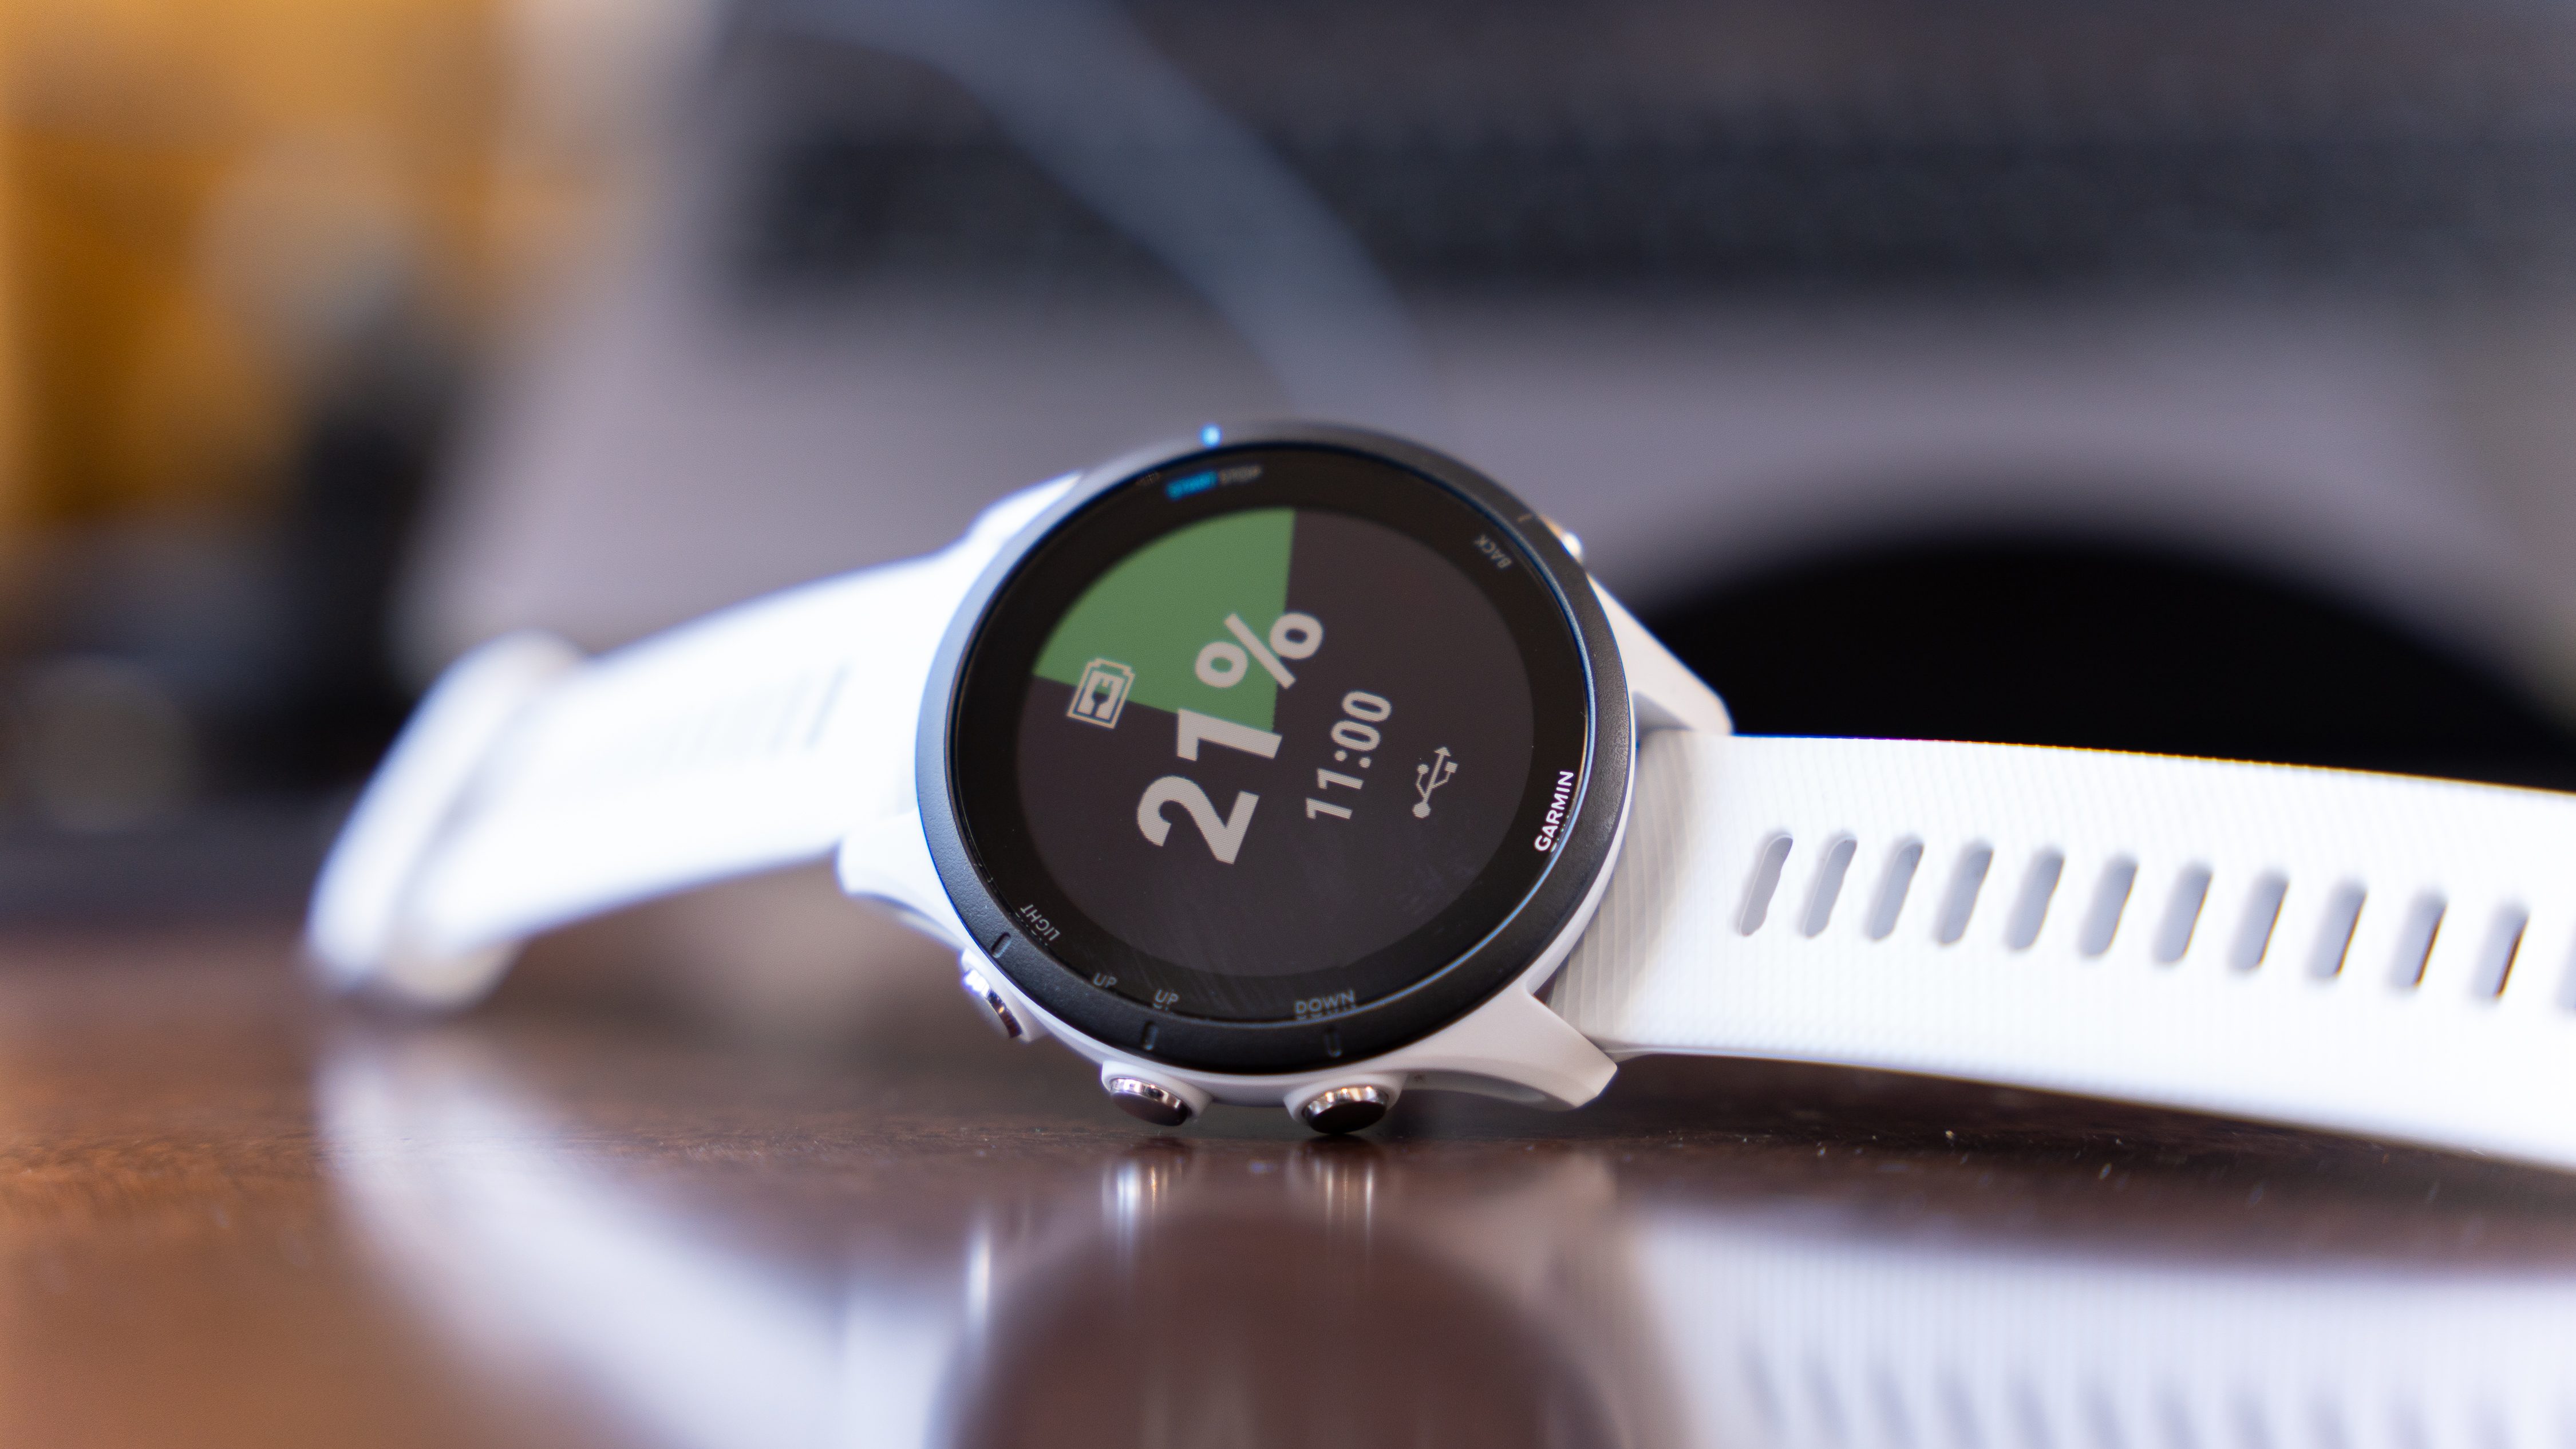 Garmin Forerunner 265 review: Brilliant but far too expensive